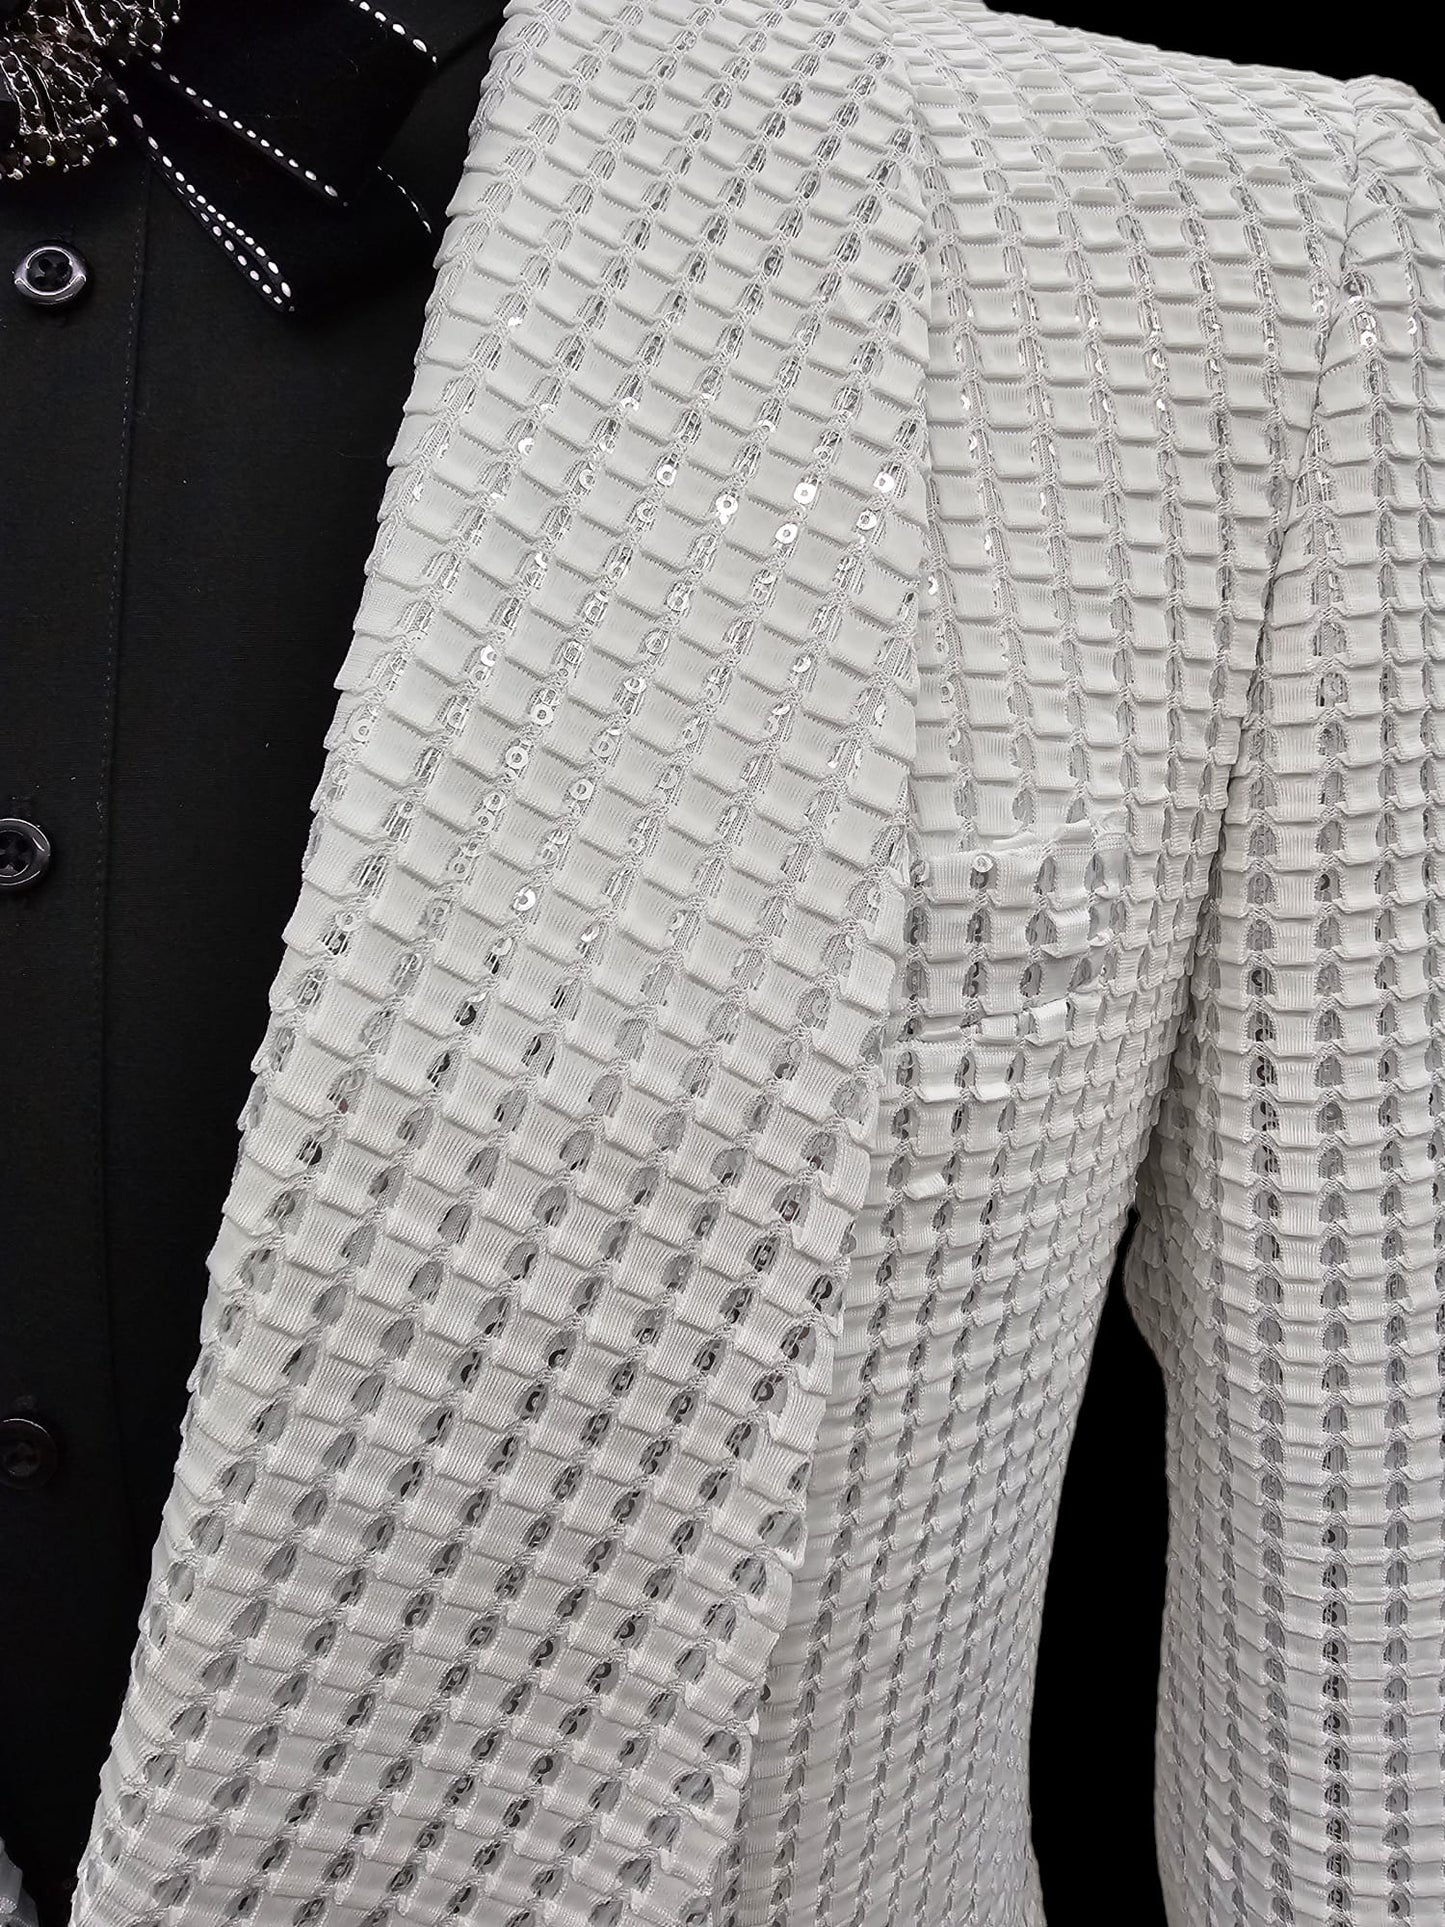 Elegant white sequin tuxedo suit by KCT Menswear, ideal for proms and weddings.